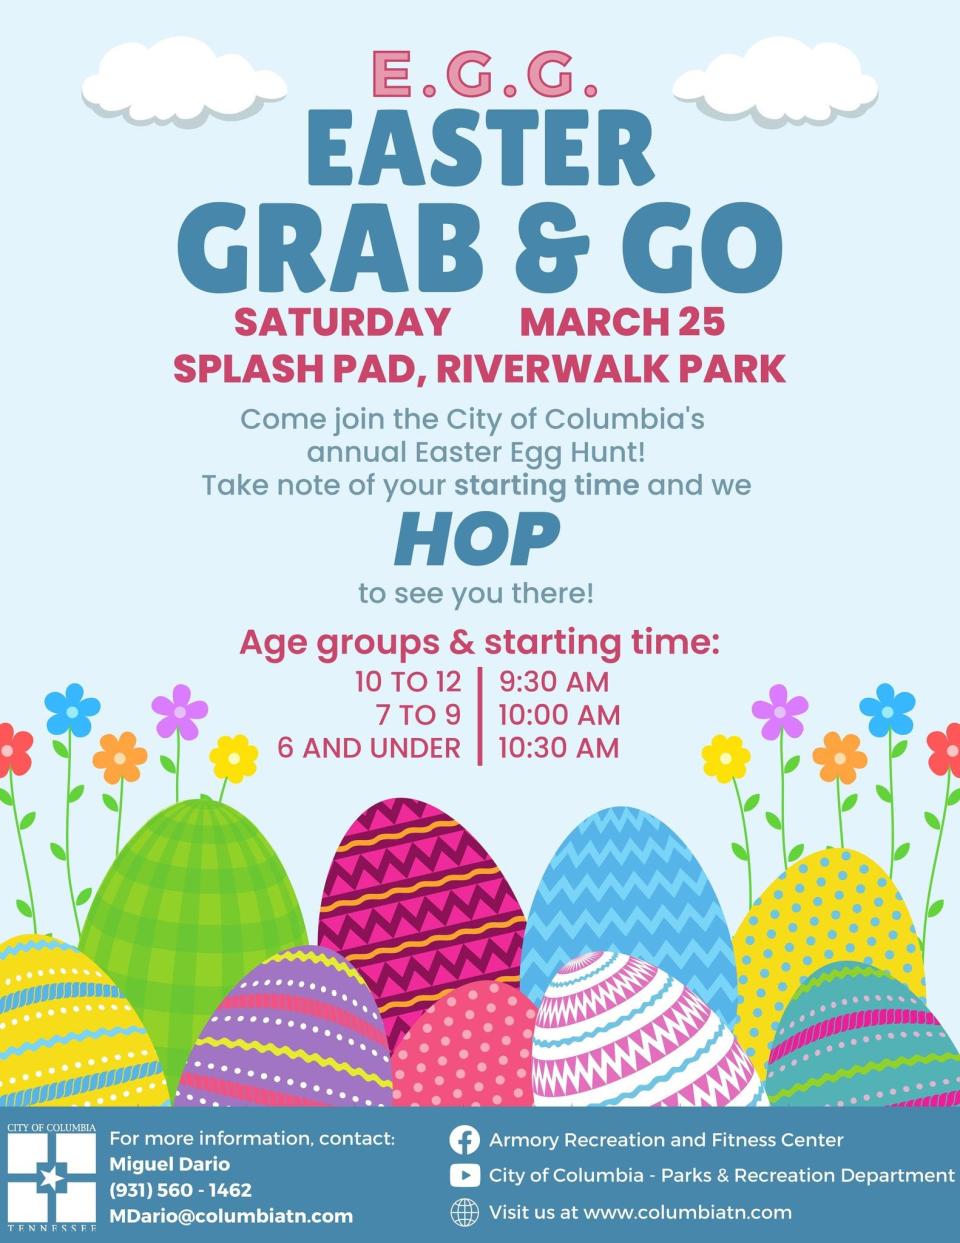 Columbia will host its annual Easter Egg Hunt this weekend at Riverwalk Park as part of its Easter Grab & Go event.